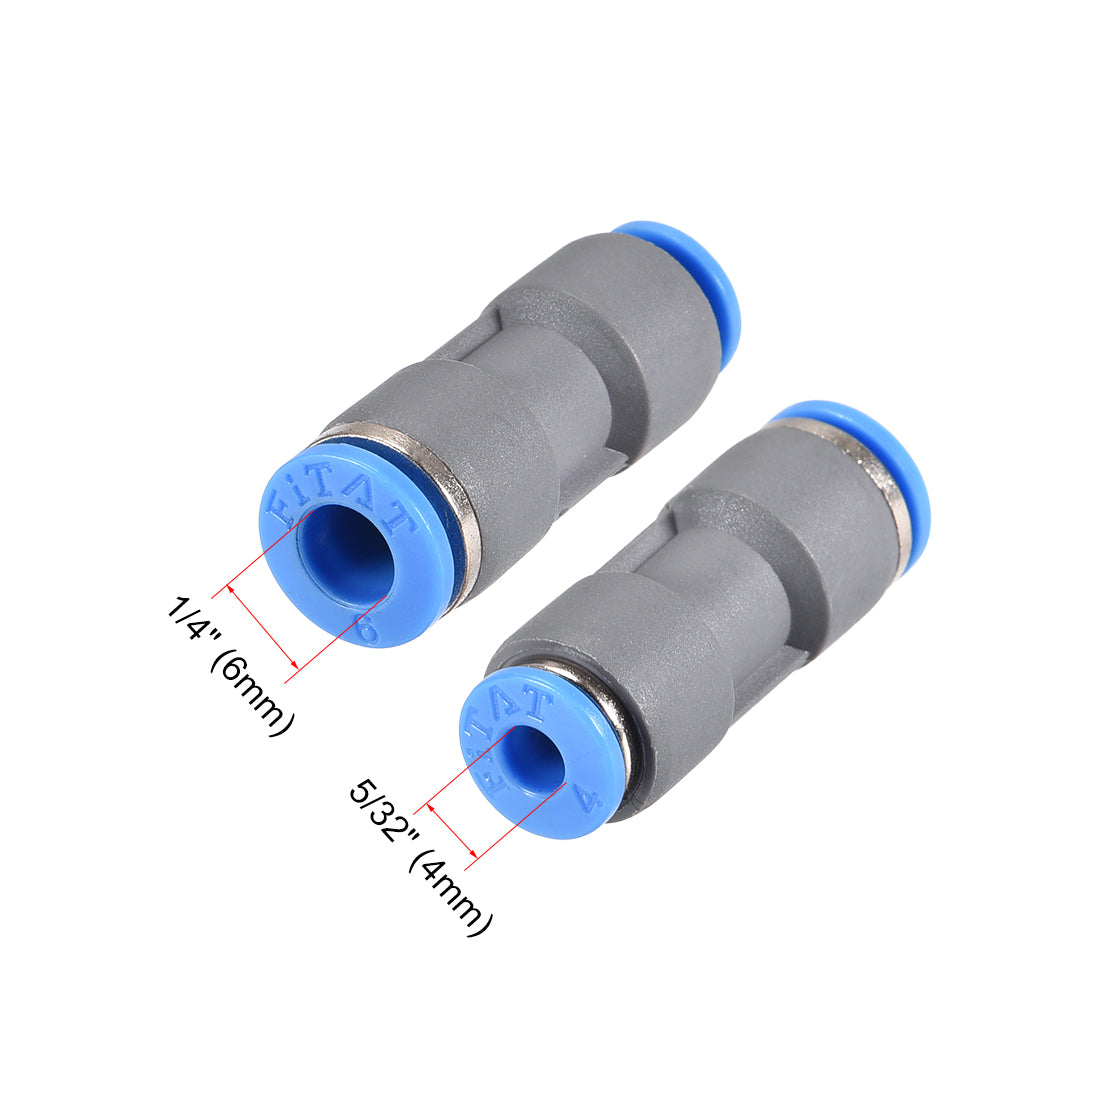 uxcell Uxcell Straight Push Connectors 6mm to 4mm Quick Release Pneumatic Connector Plastic Union Pipe Tube Fitting Grey 10Pcs